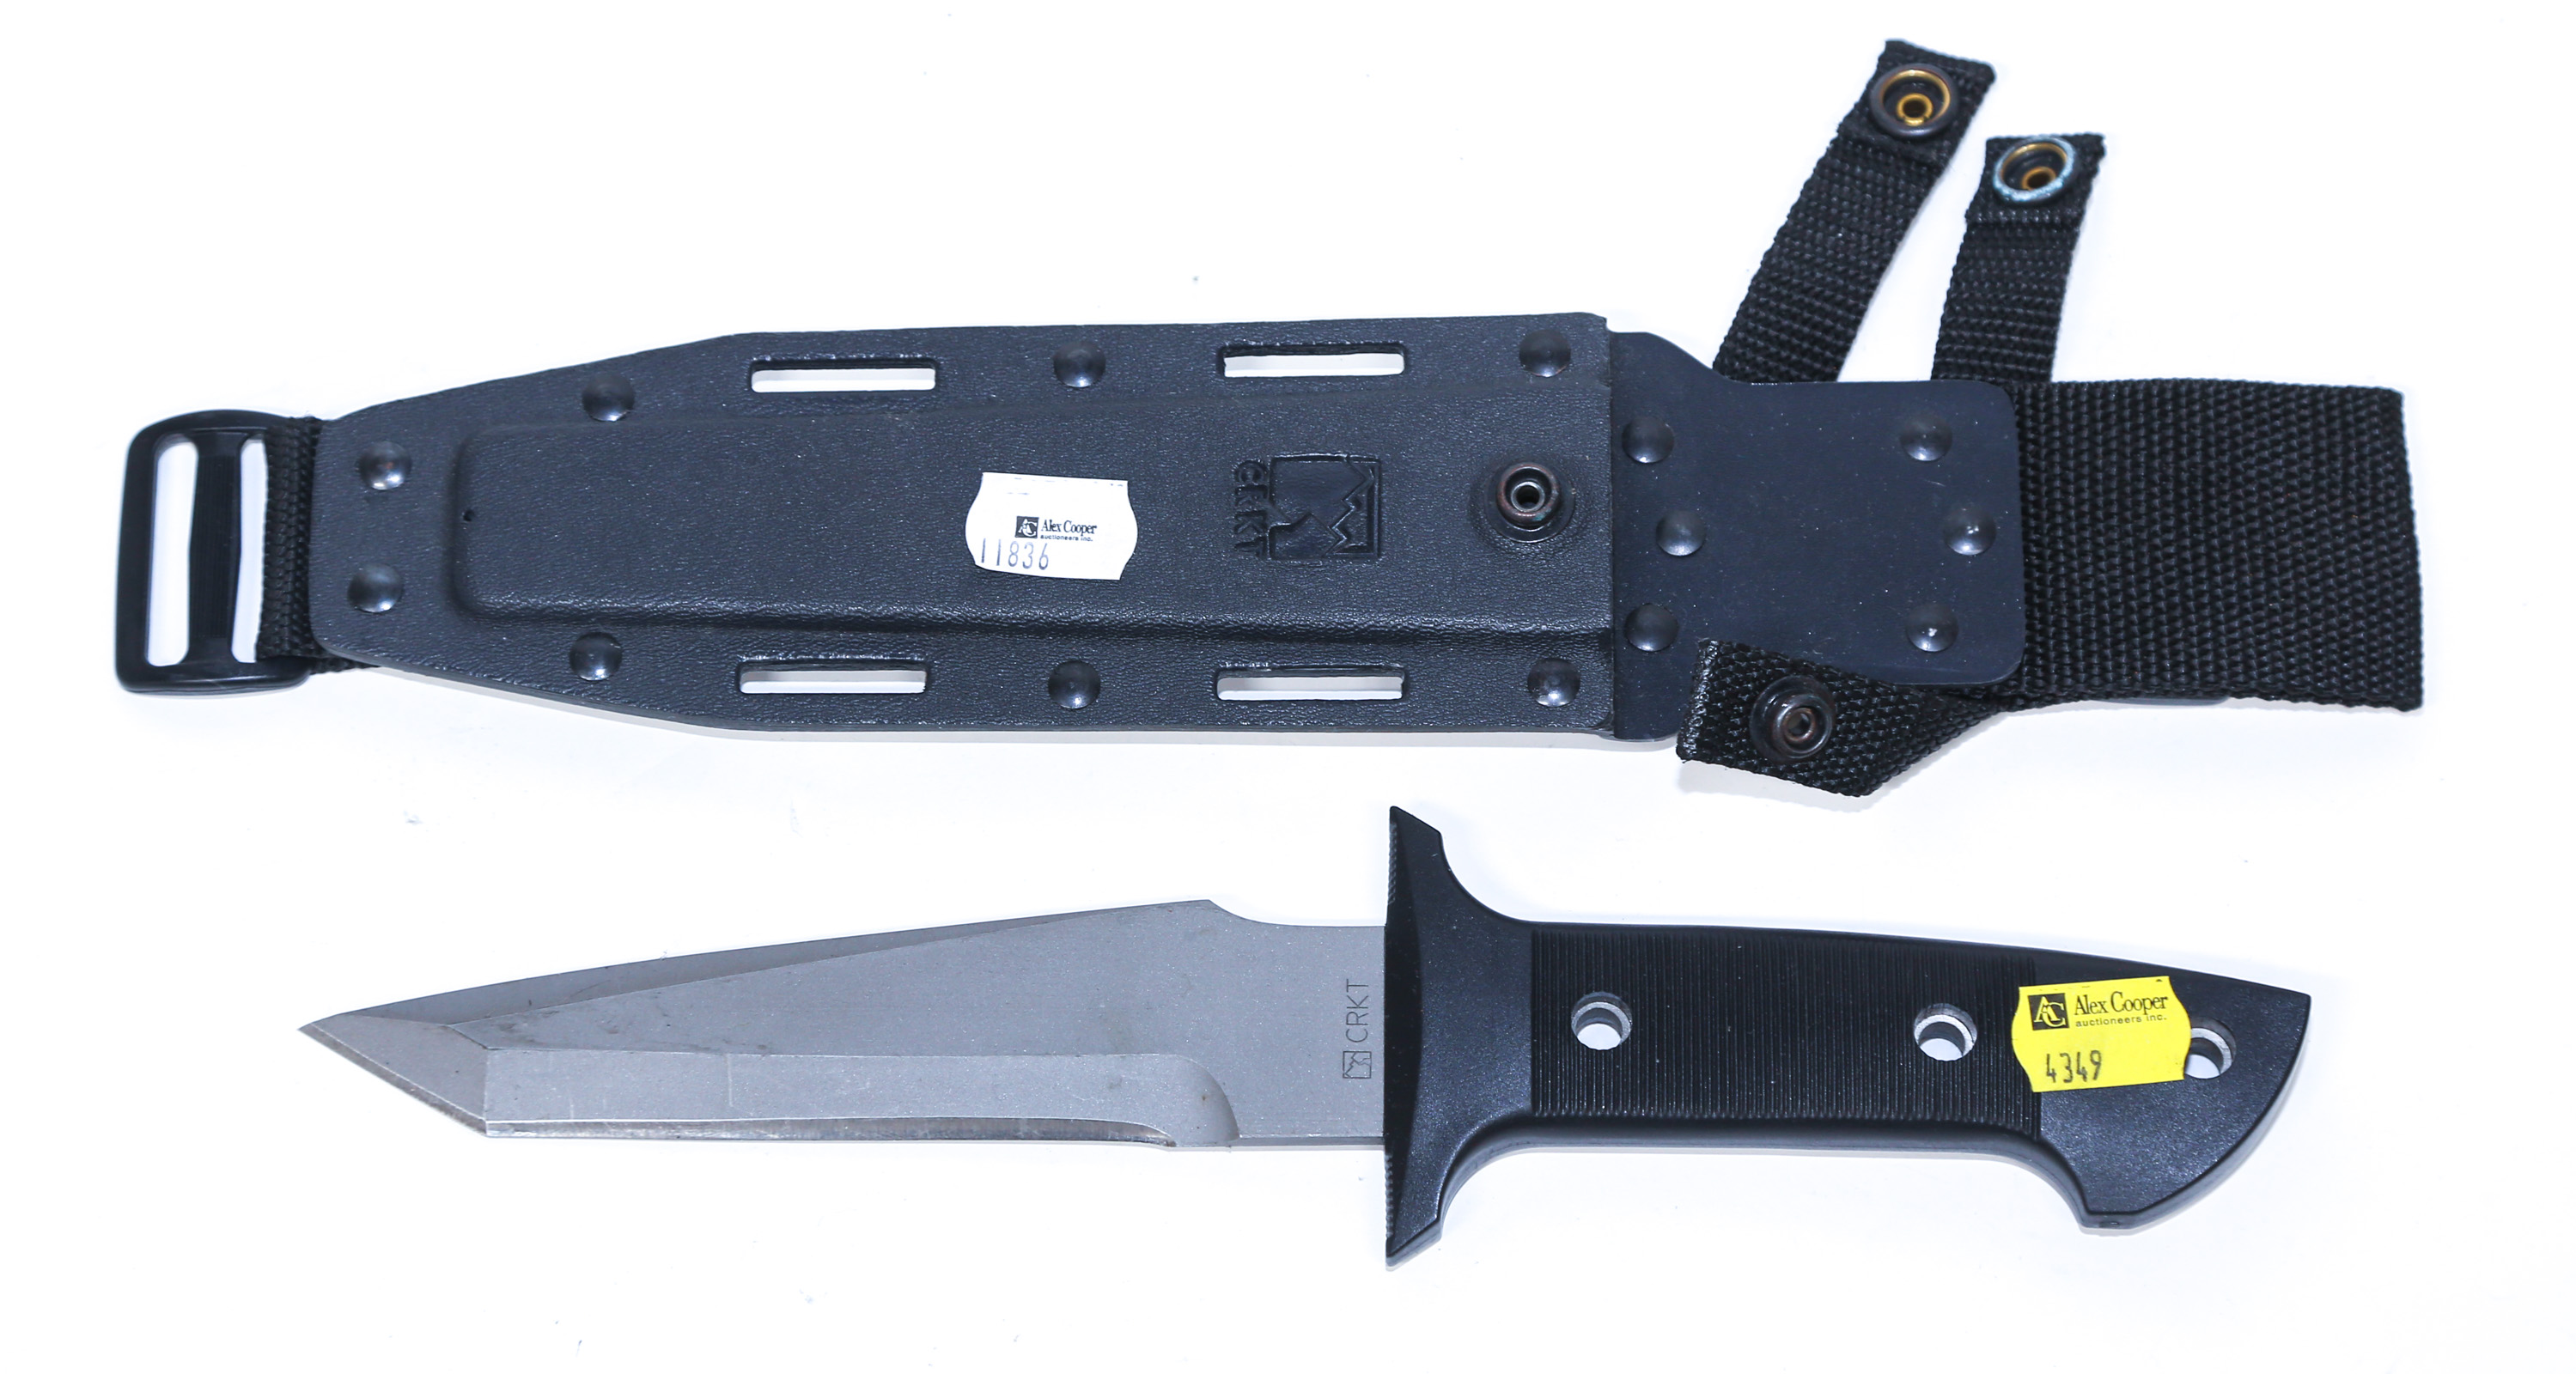 CRKT KOMODO 7 FIXED BLADE KNIFE With